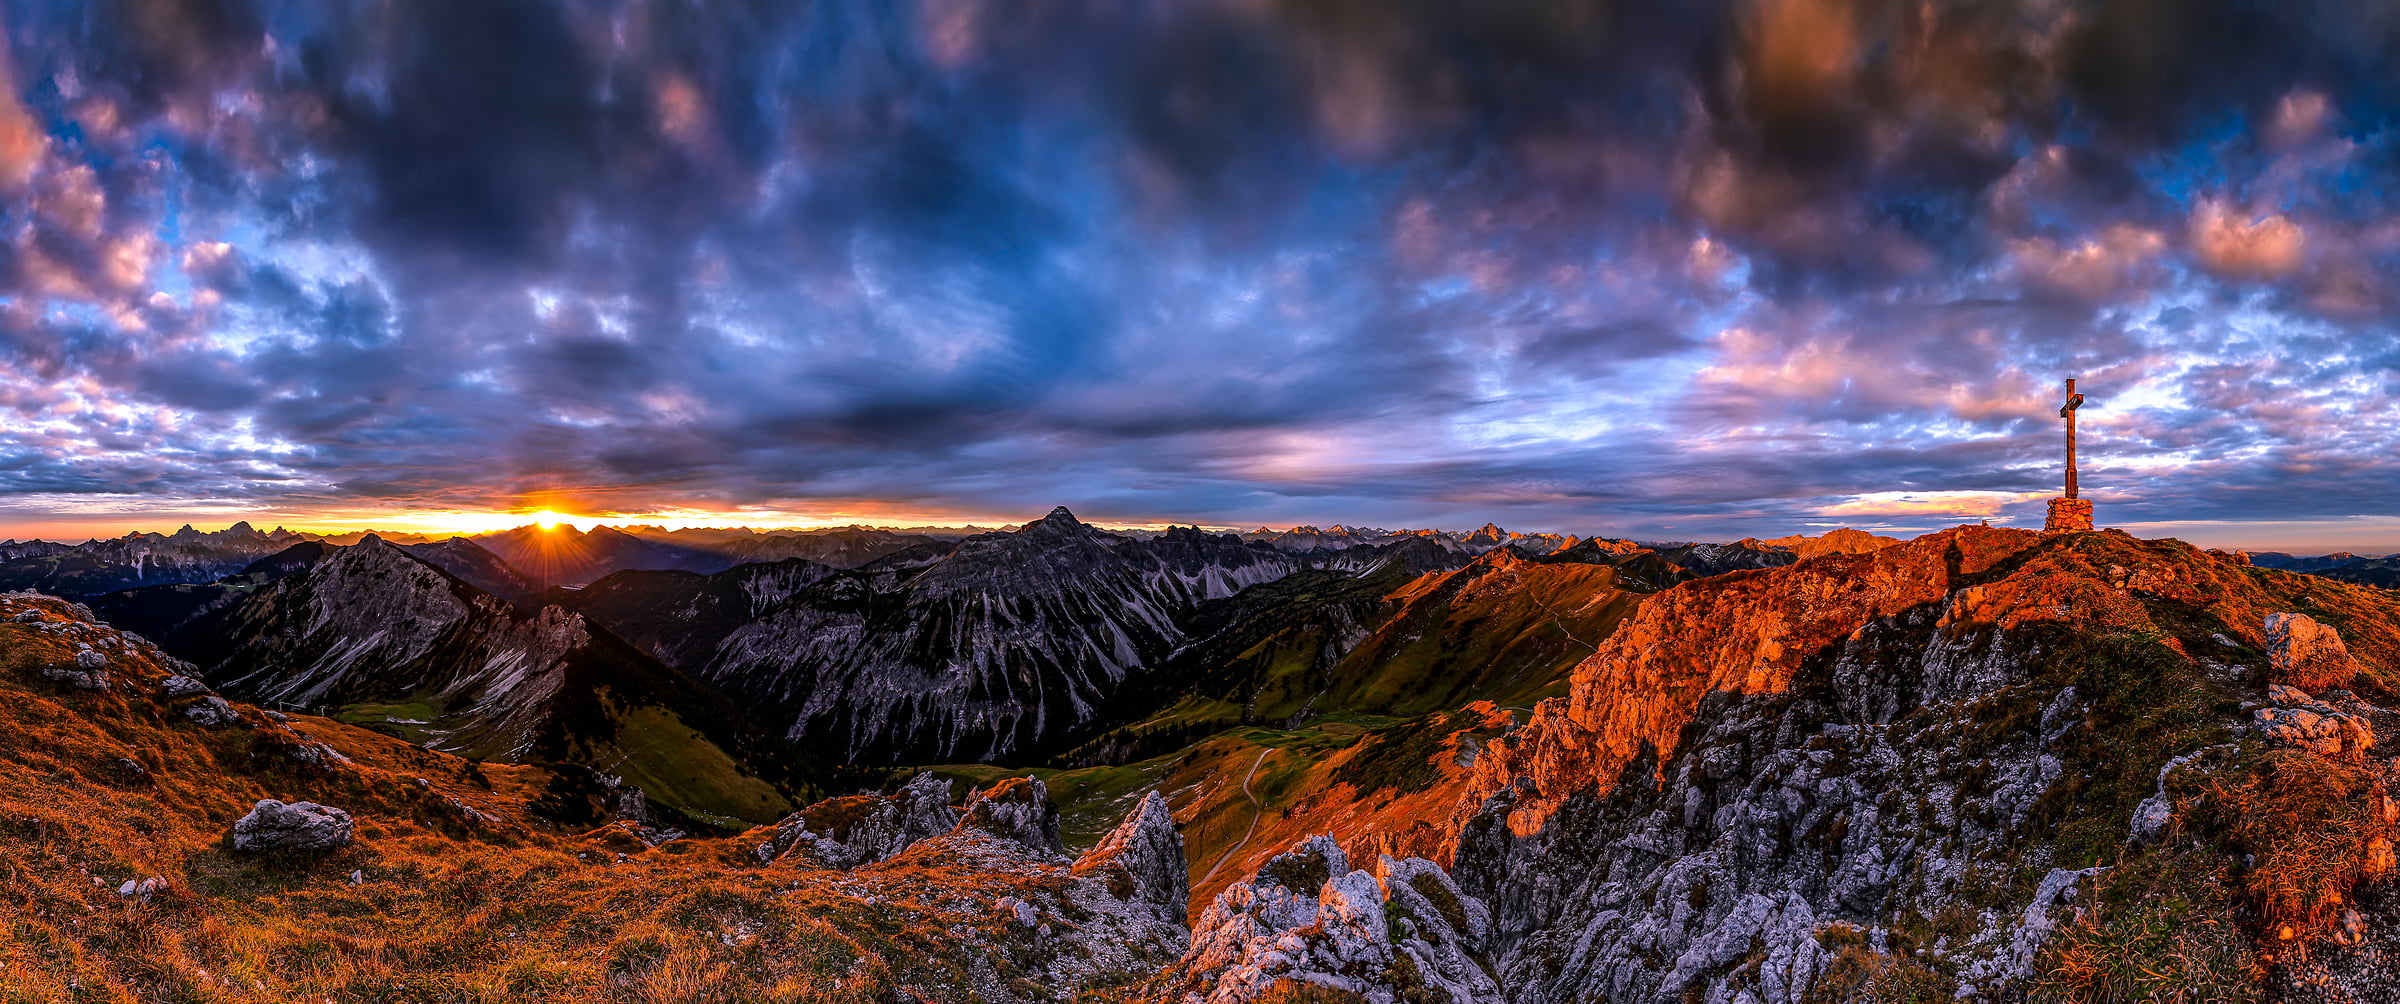 102 megapixels! A very high resolution, large-format VAST photo print of an alpine sunset in the mountains; landscape photograph created by Alfred Feil in Allgäuer Alpen, Tirol, Austria.